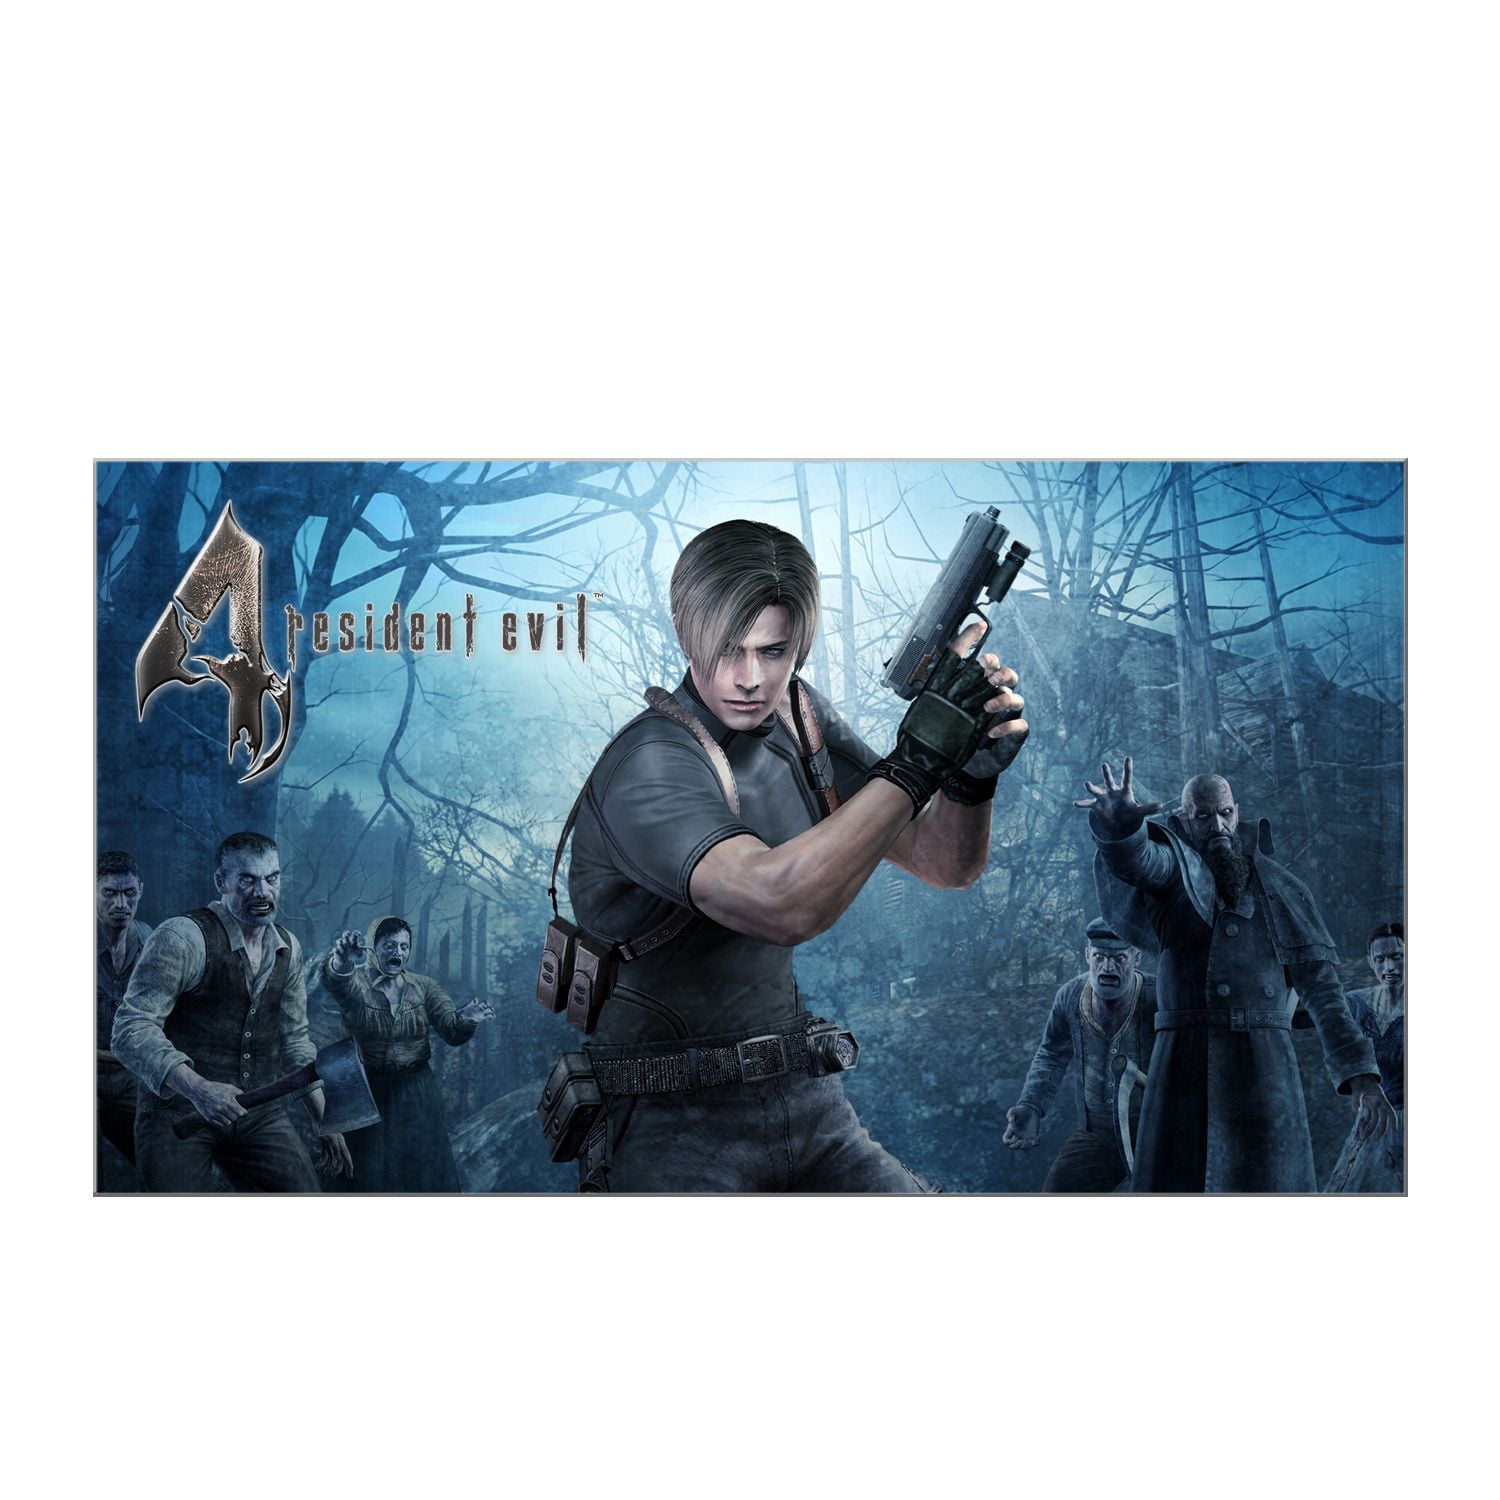 Resident Evil 4 - Xbox One - Brand New, Factory Sealed 13388550203